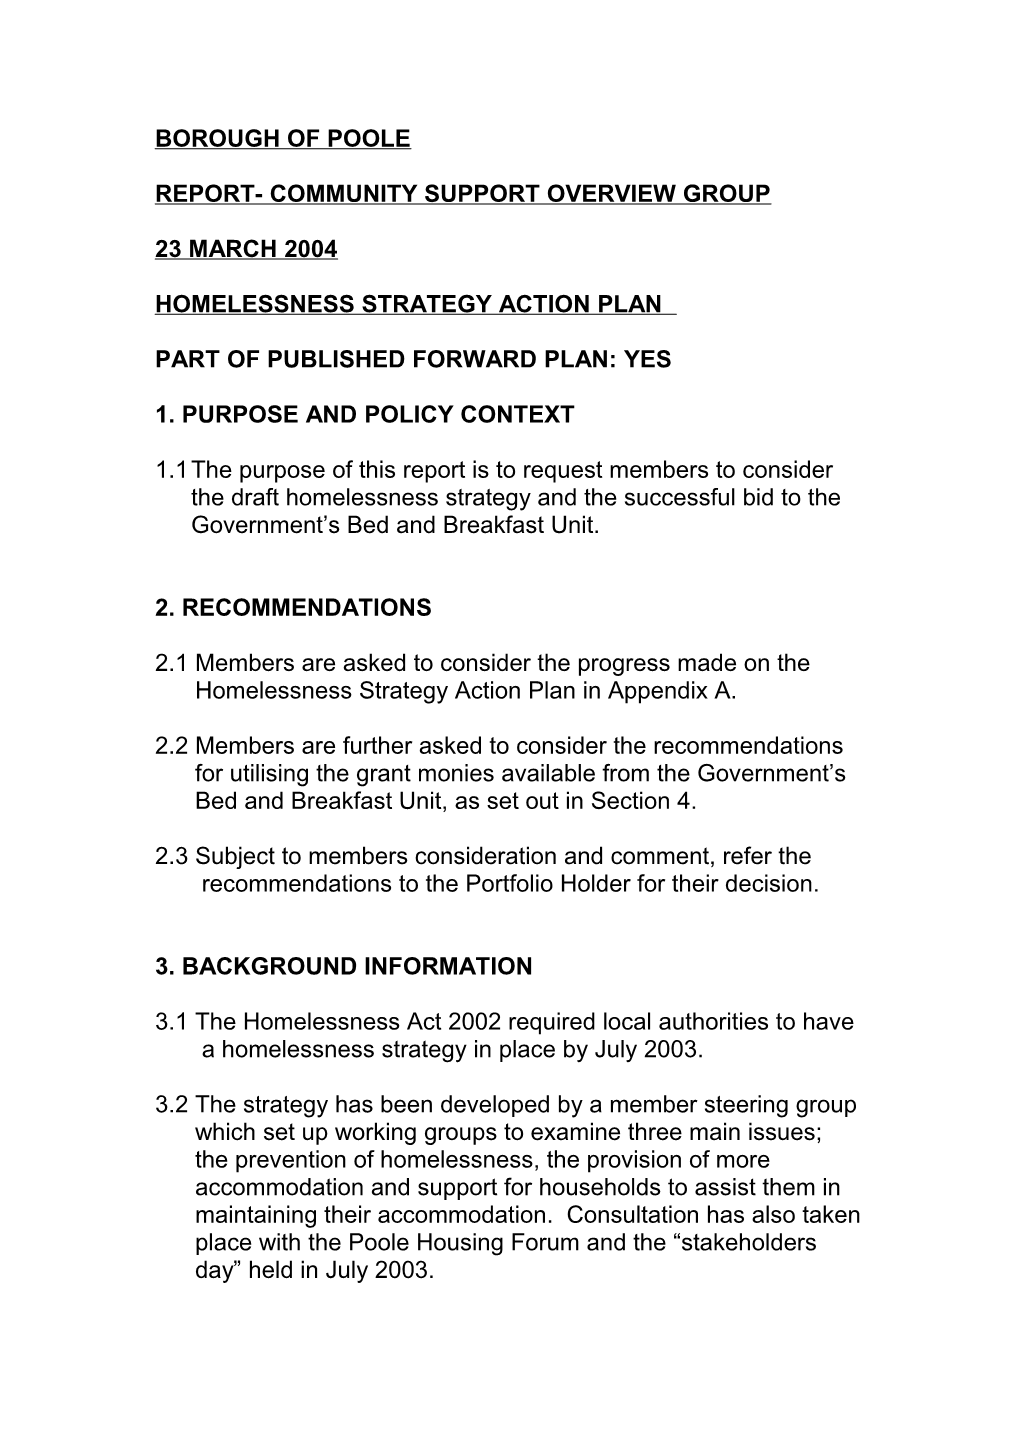 Homelessness Strategy Action Plan